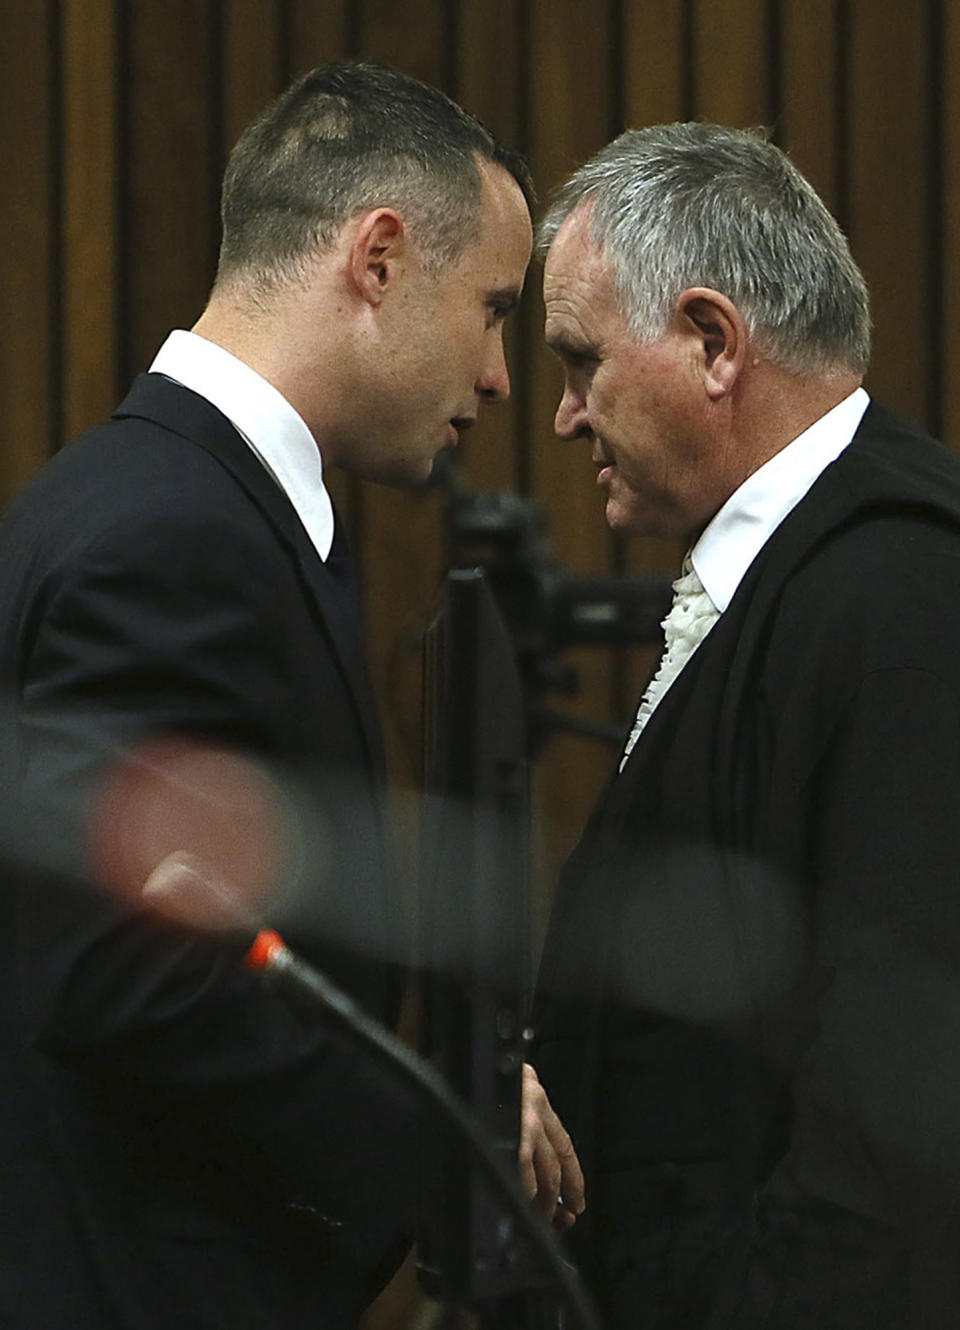 Oscar Pistorius, right, and his defense attorney Barry Roux, left, attend his murder trial at a court in Pretoria, South Africa, Tuesday May 6, 2014. Pistorius is charged with the shooting death of his girlfriend Reeva Steenkamp on Valentine's Day in 2013. (AP Photo/Alon Skuy, Pool)